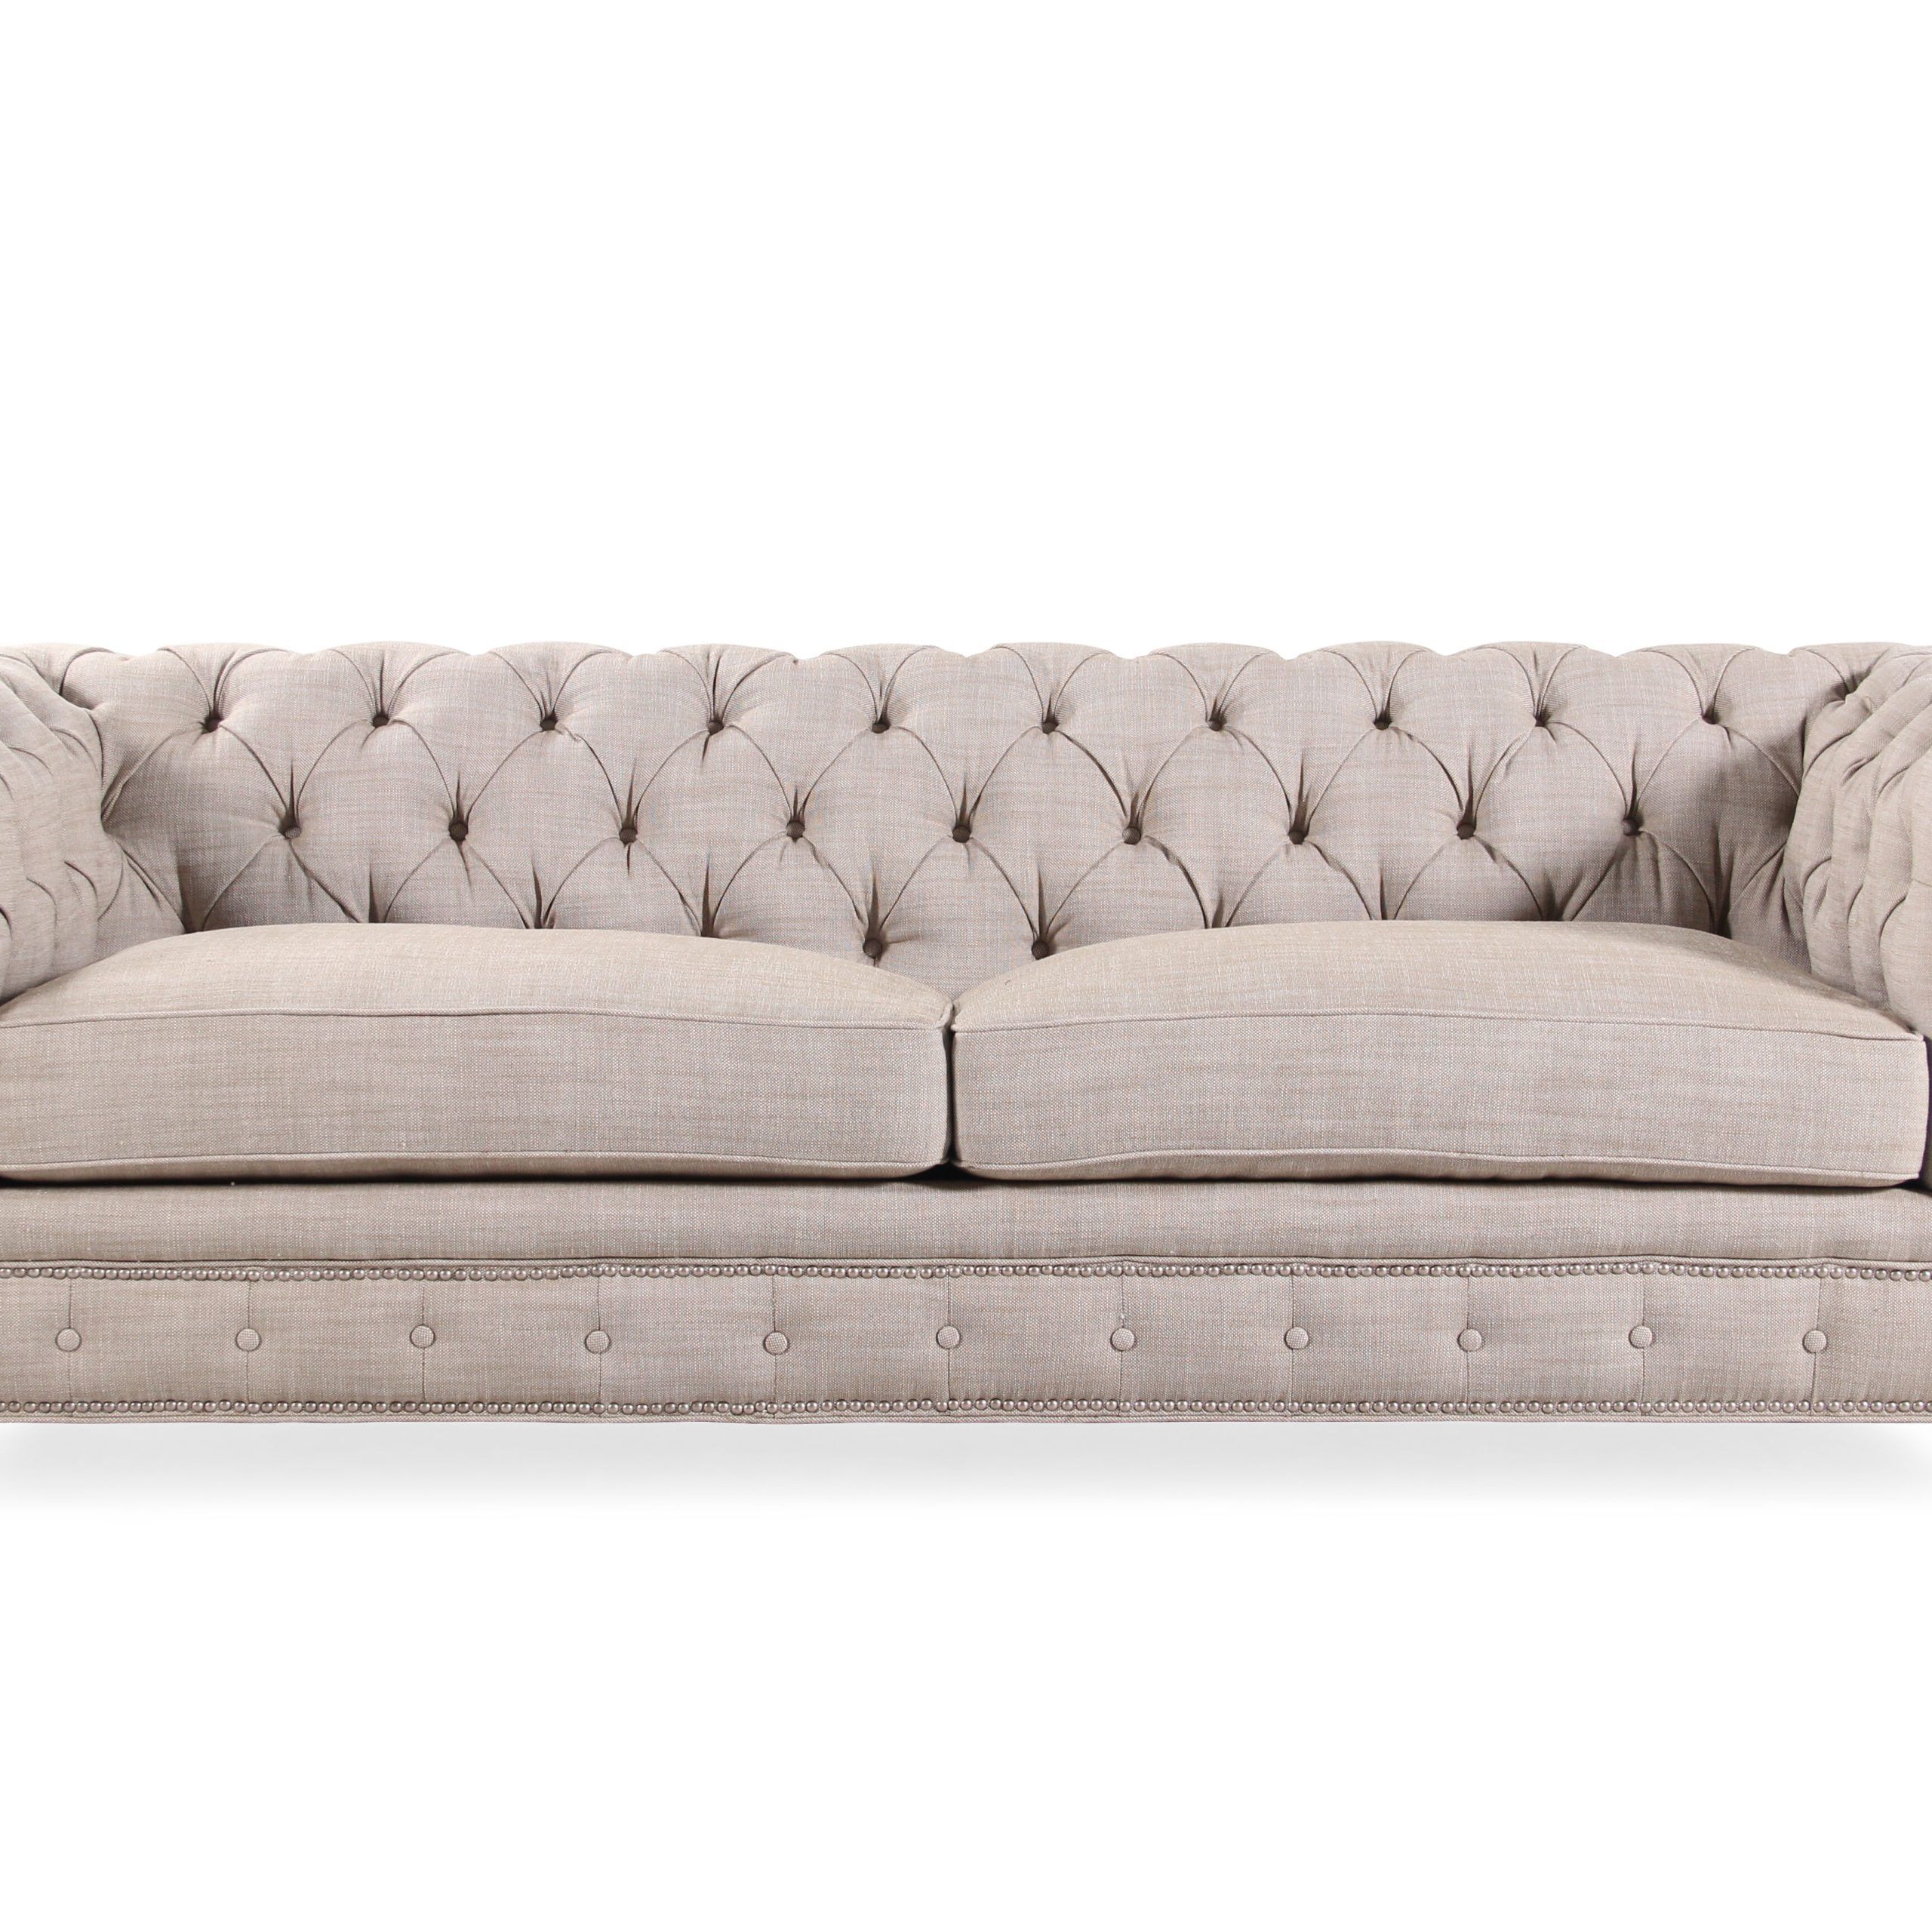 Traditional Button Tufted 102" Sofa In Cream | Mathis Brothers Furniture Inside Sofas In Cream (View 4 of 20)